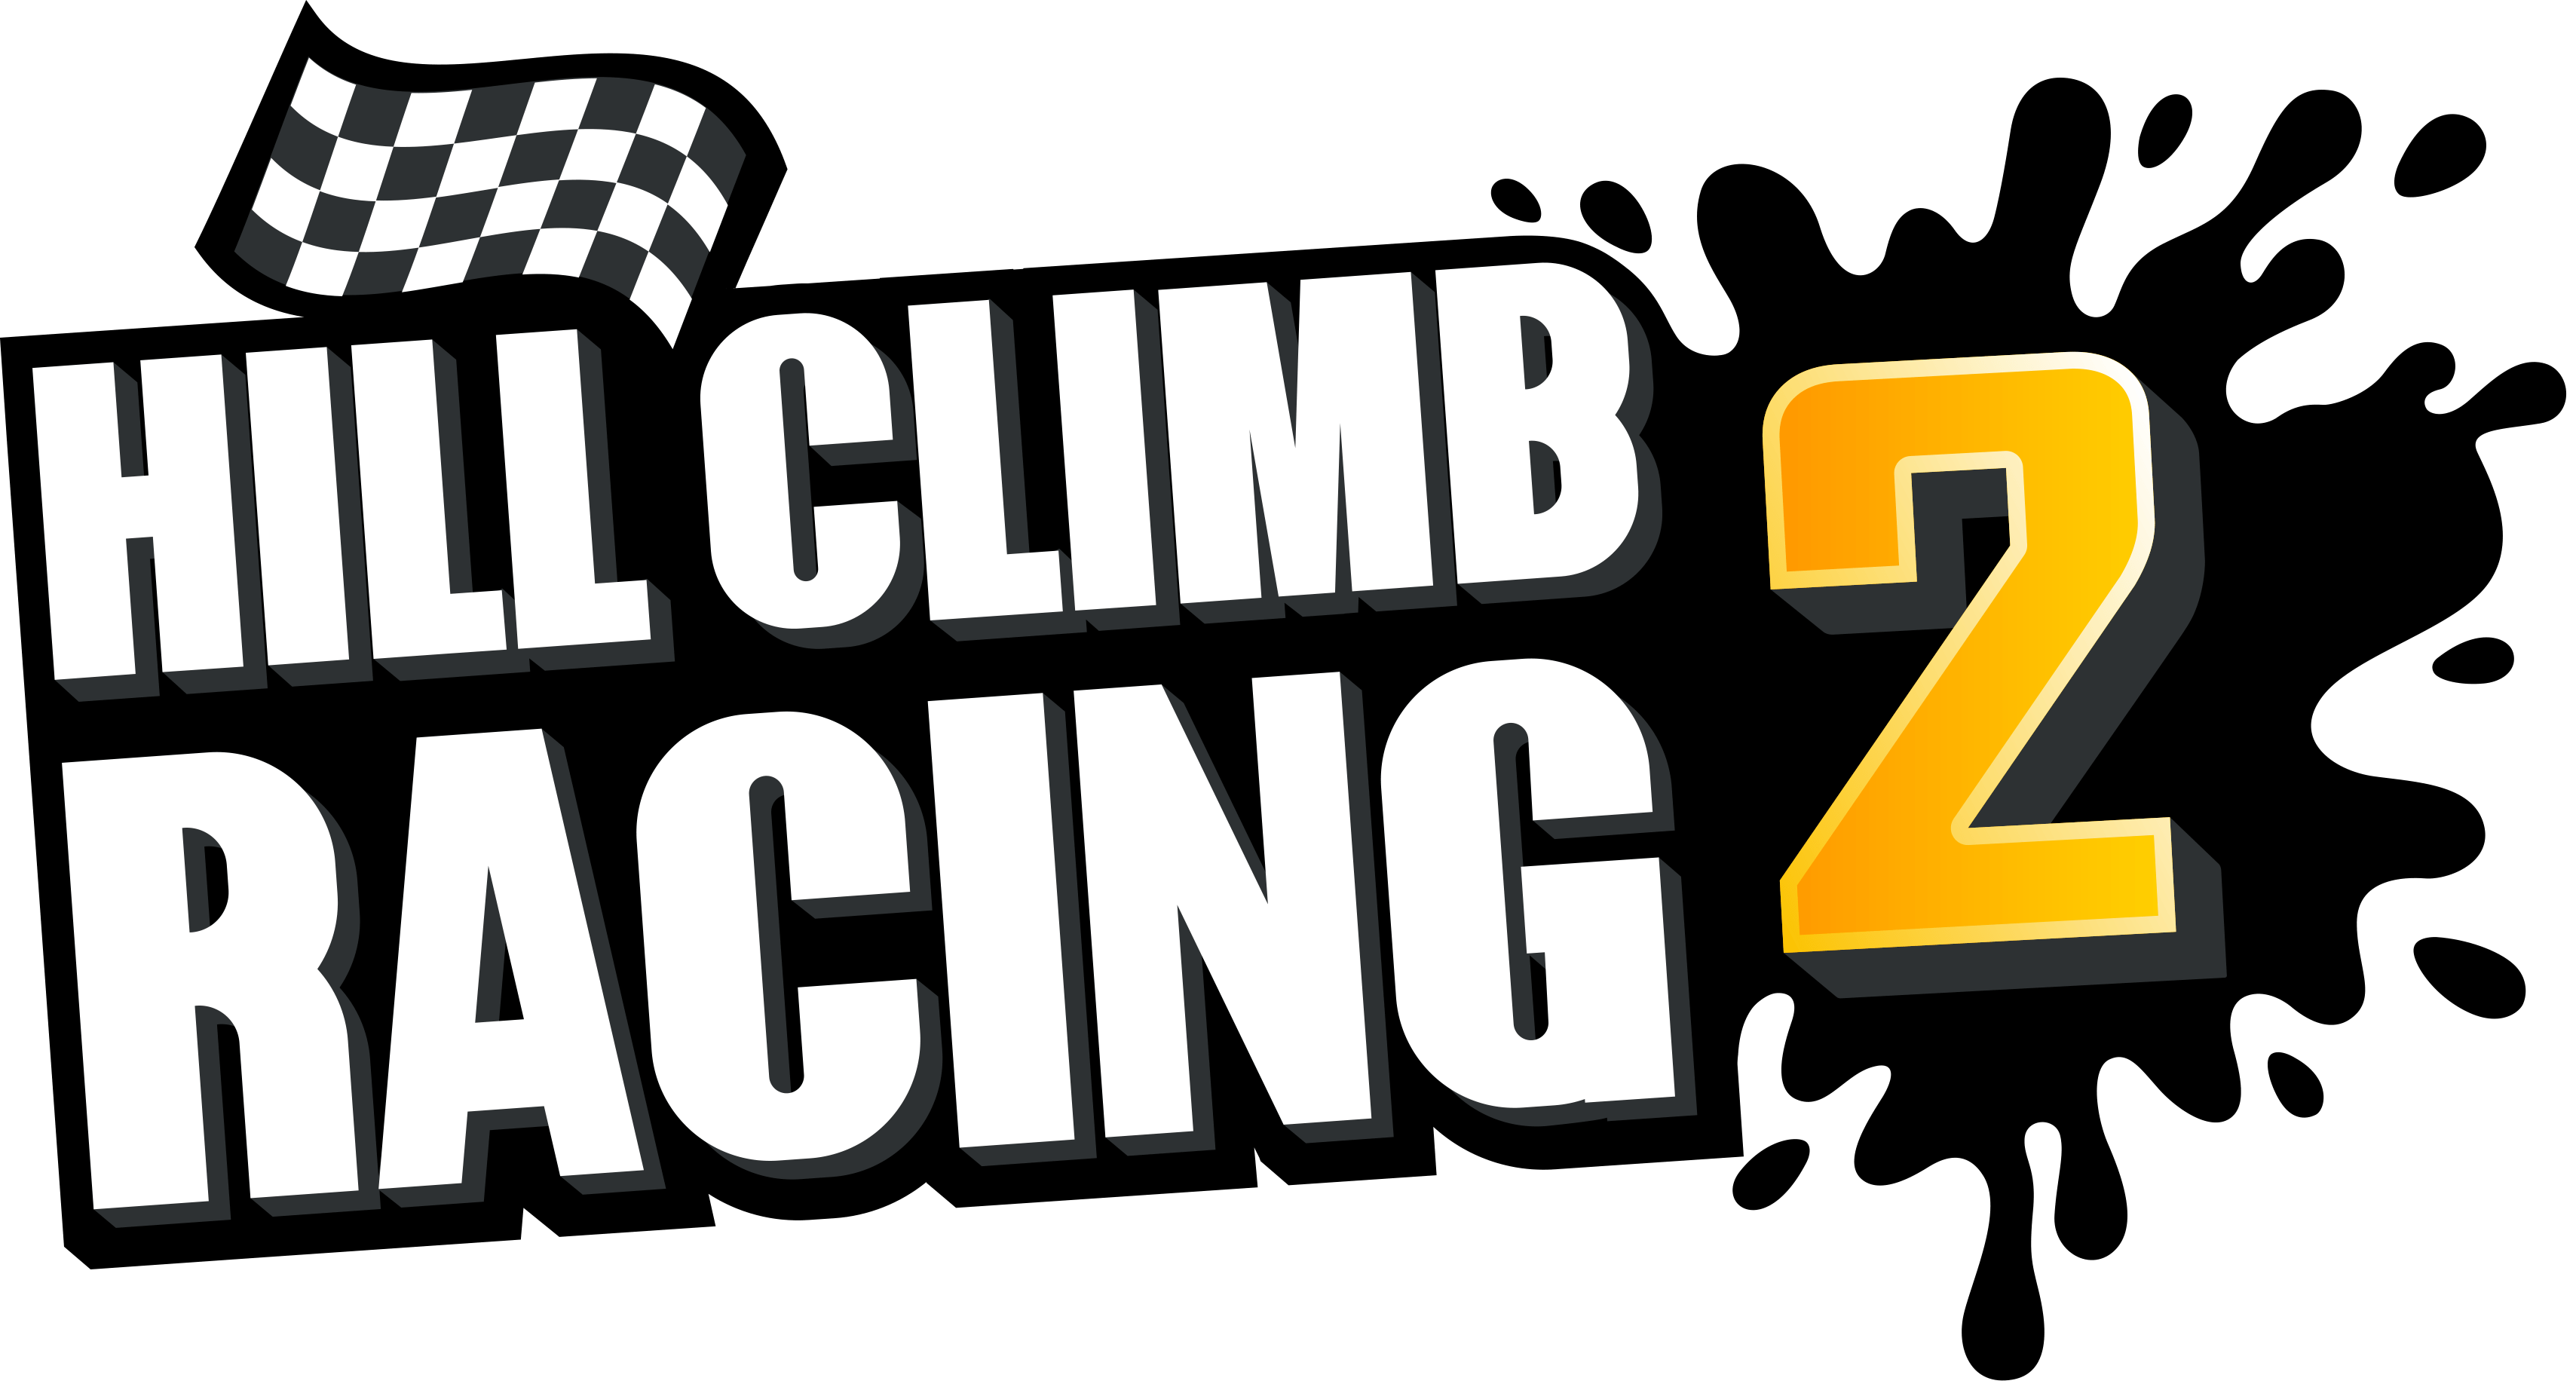 hill climb race 2 game download